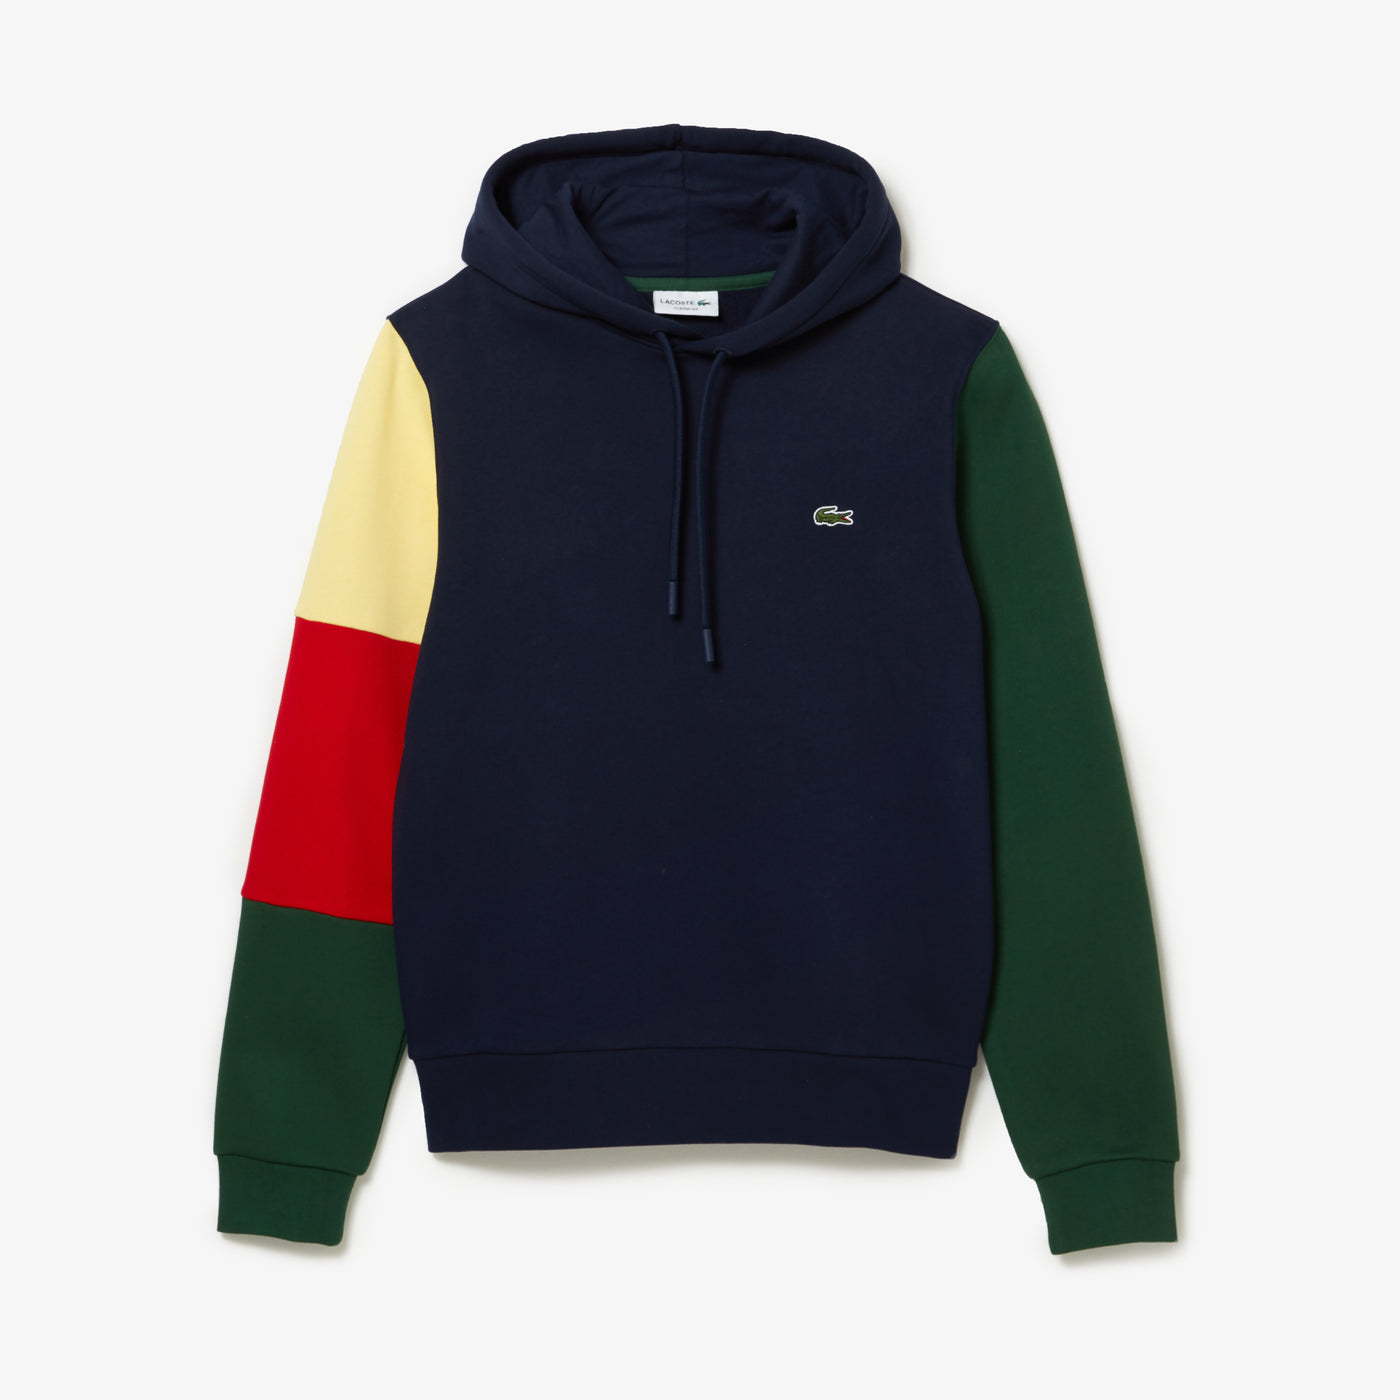 Shop The Latest Collection Of Lacoste Men'S Lacoste Hooded Sweatshirt - Sh9620 In Lebanon